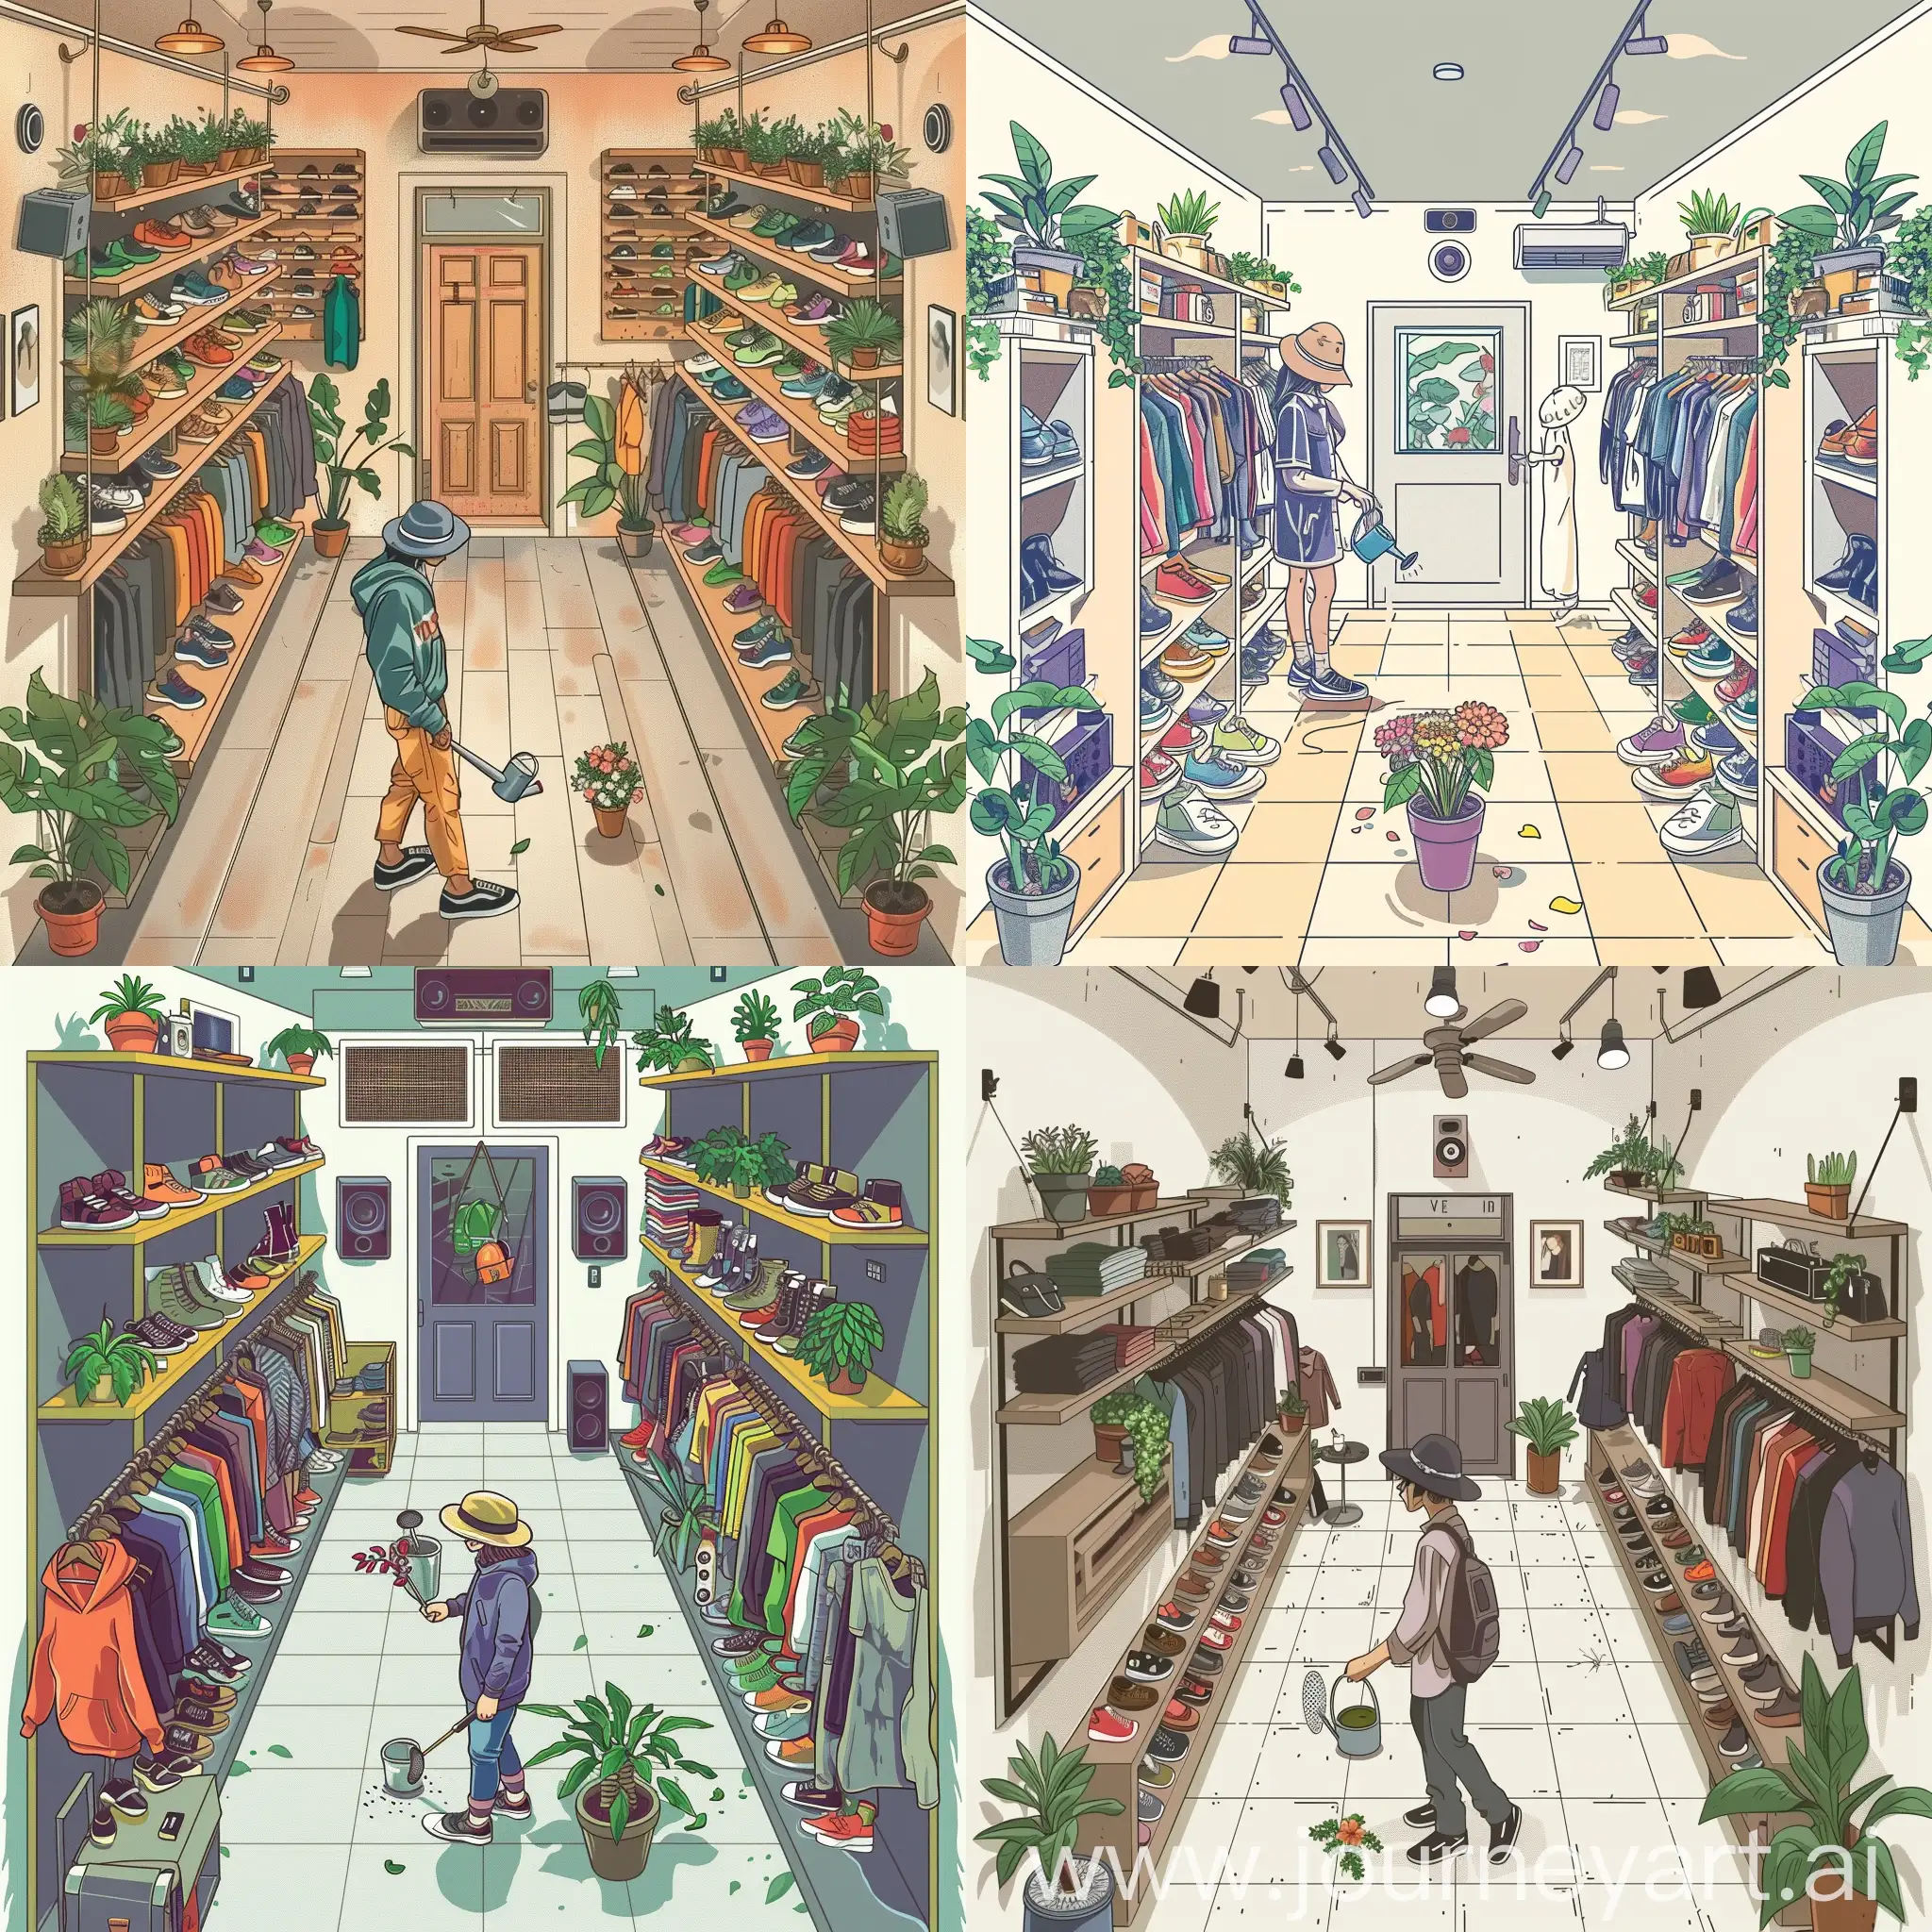 draw vector illustration of vintage clothing and shoe store inside, at the beginning of the store on the aisle there is a seller in fashionable vintage street style clothes and watering a flower, the room itself is not narrow but quite spacious, in the center there is a door and two windows on the sides in the middle between the windows and the door there are shelves with shoes and in the middle of the store there are racks with clothes, at the top there is a sound system hanging in the corners, green plants in pots are placed around the store 